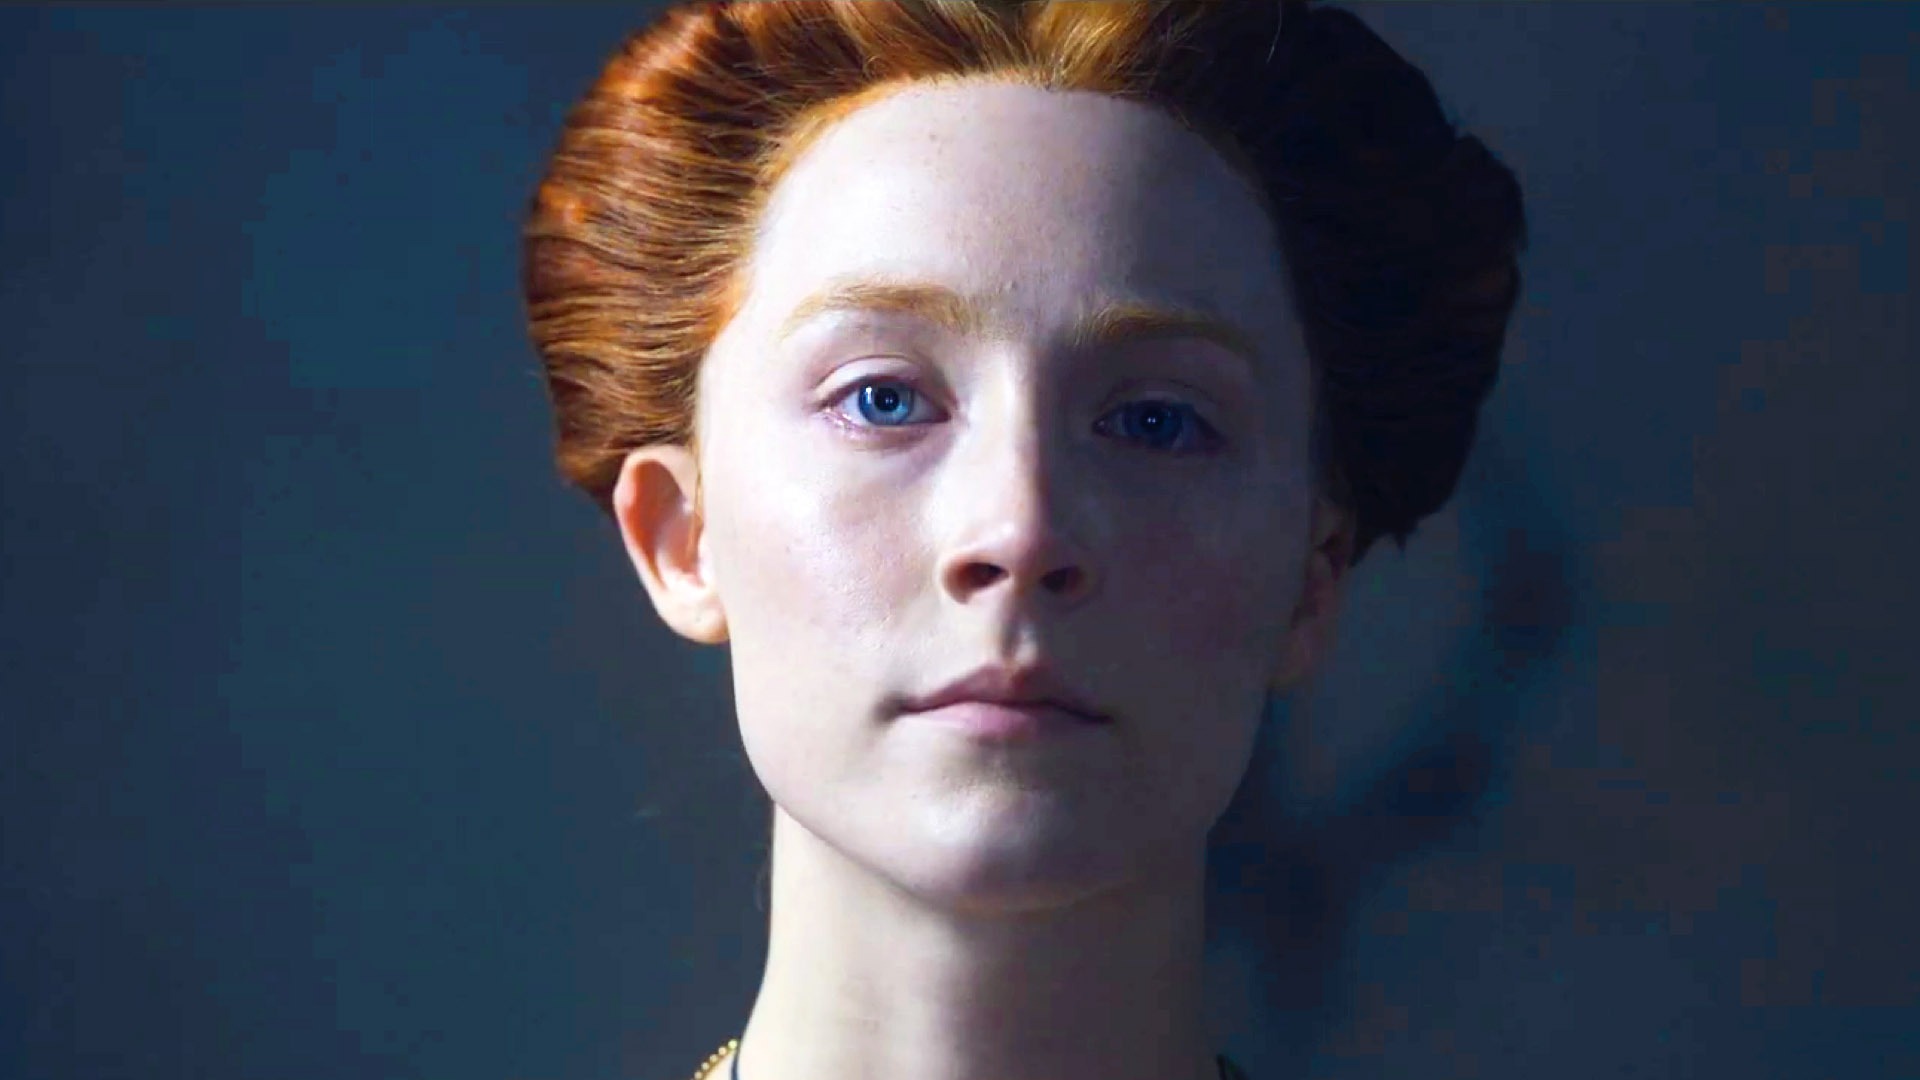 Mary Queen of Scots: Trailer 2 - Trailers & Videos - Rotten Tomatoes